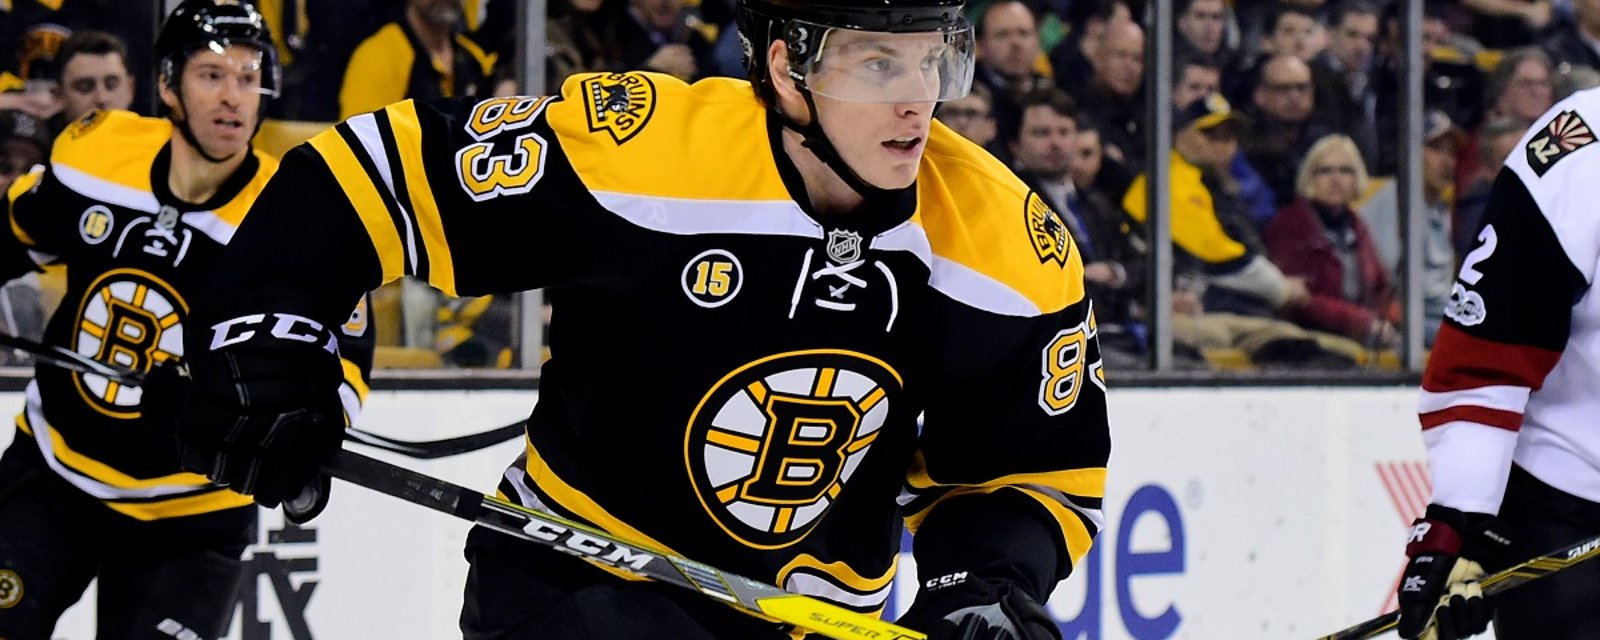 Peter Cehlarik frustrated with the Bruins, could leave the team.